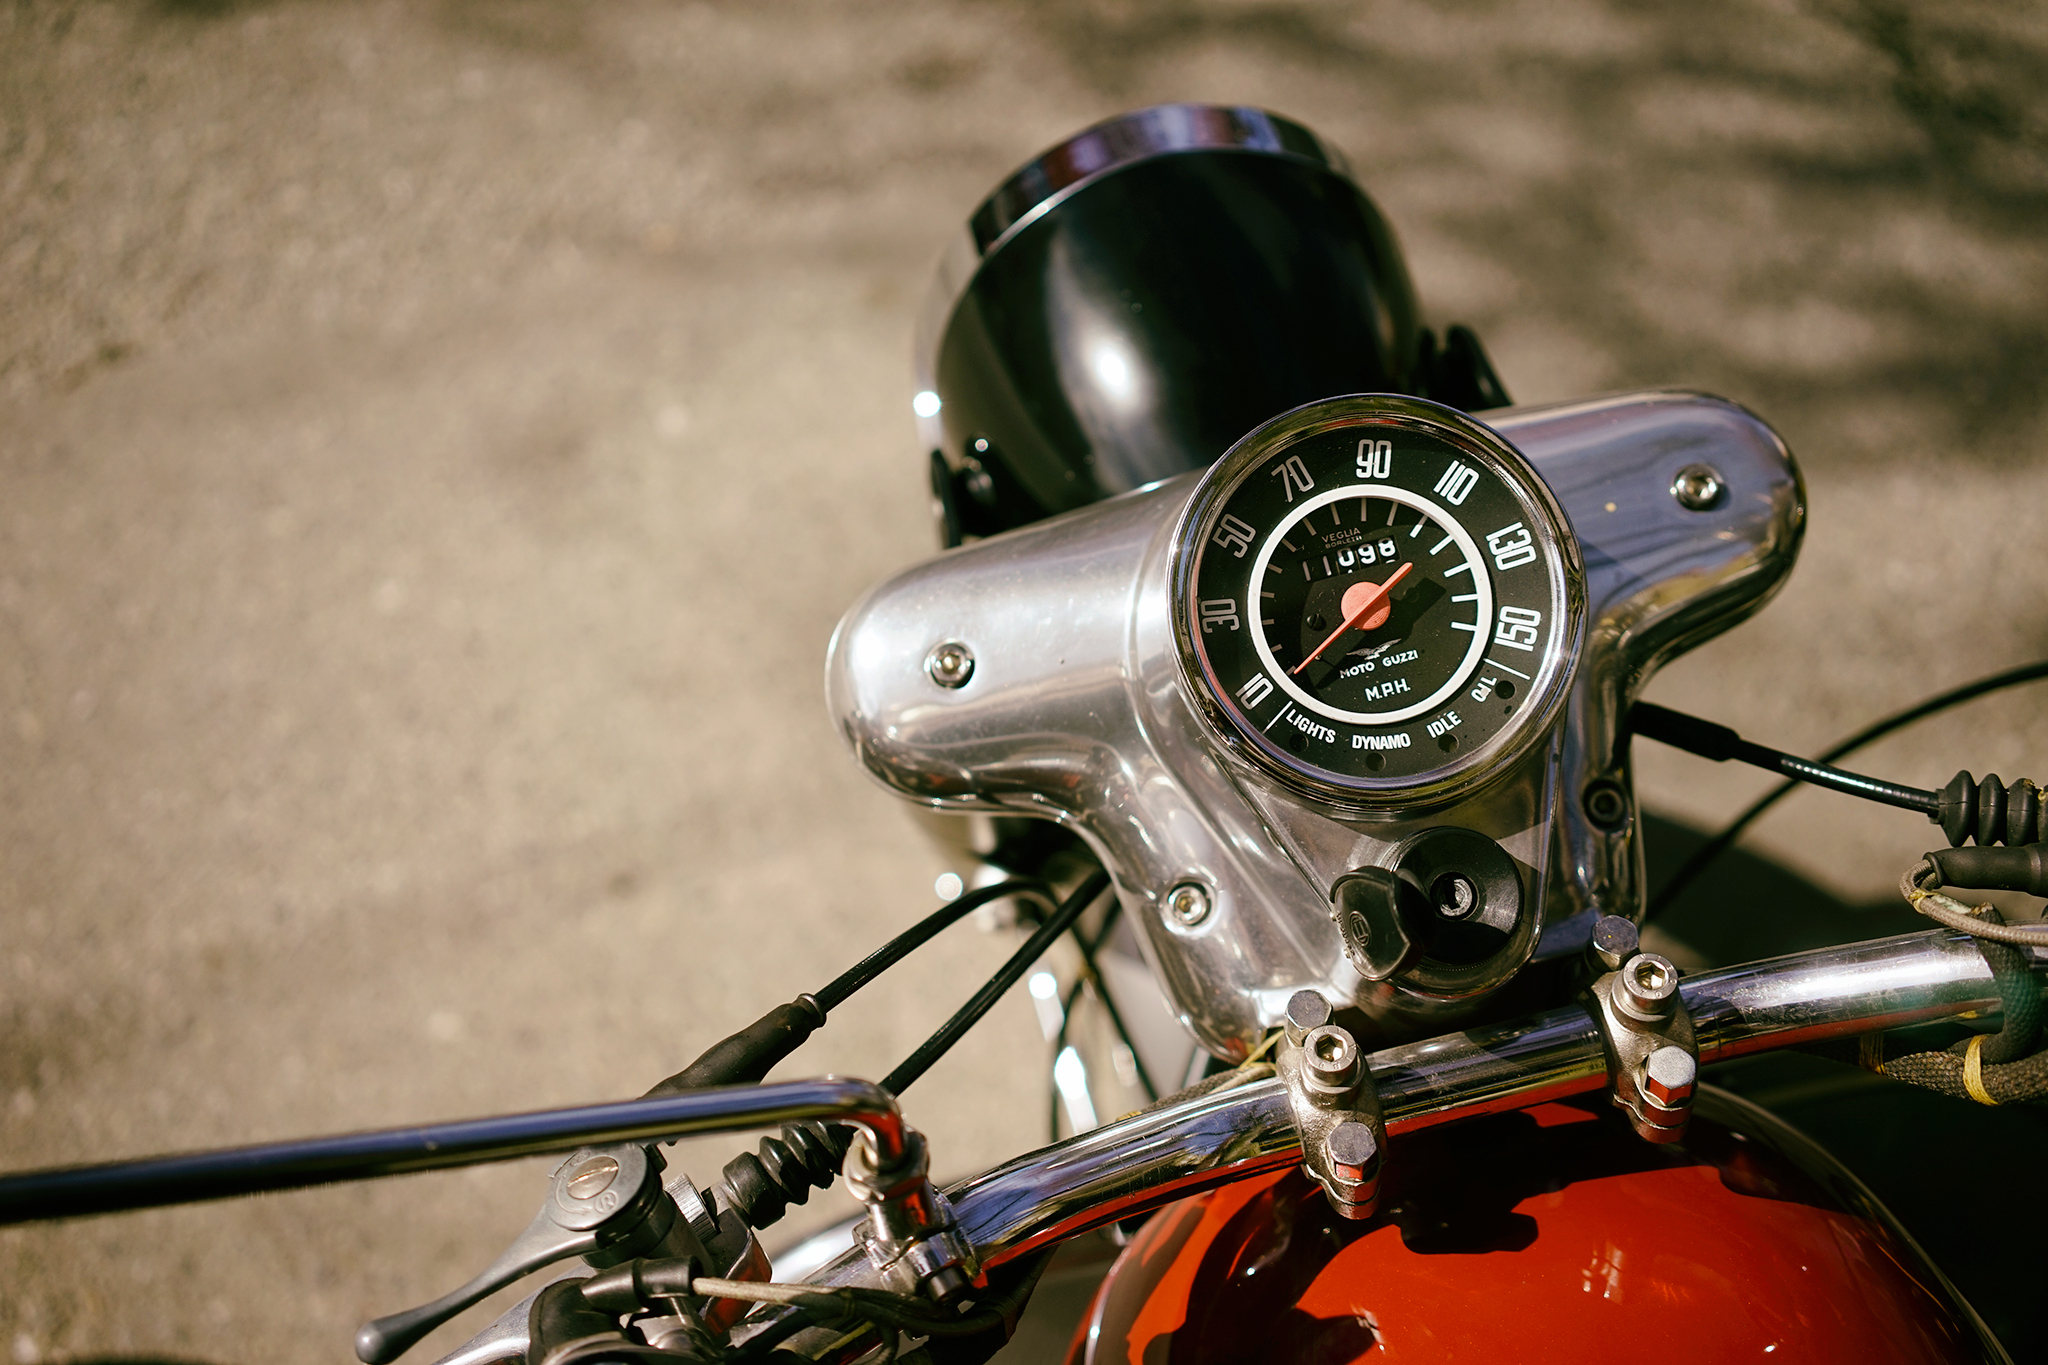 2048x1365 Wallpaper : old, city, car, bicycle, urban, motorcycle, metal, Canada, vintage, bokeh, chopper, shiny, speedometer, chrome, Vancouver, cruiser, italian, Chinatown, wheel, bike, bc, instrument, detail, polished, zeiss, classic, britishcolumbia, sports ..